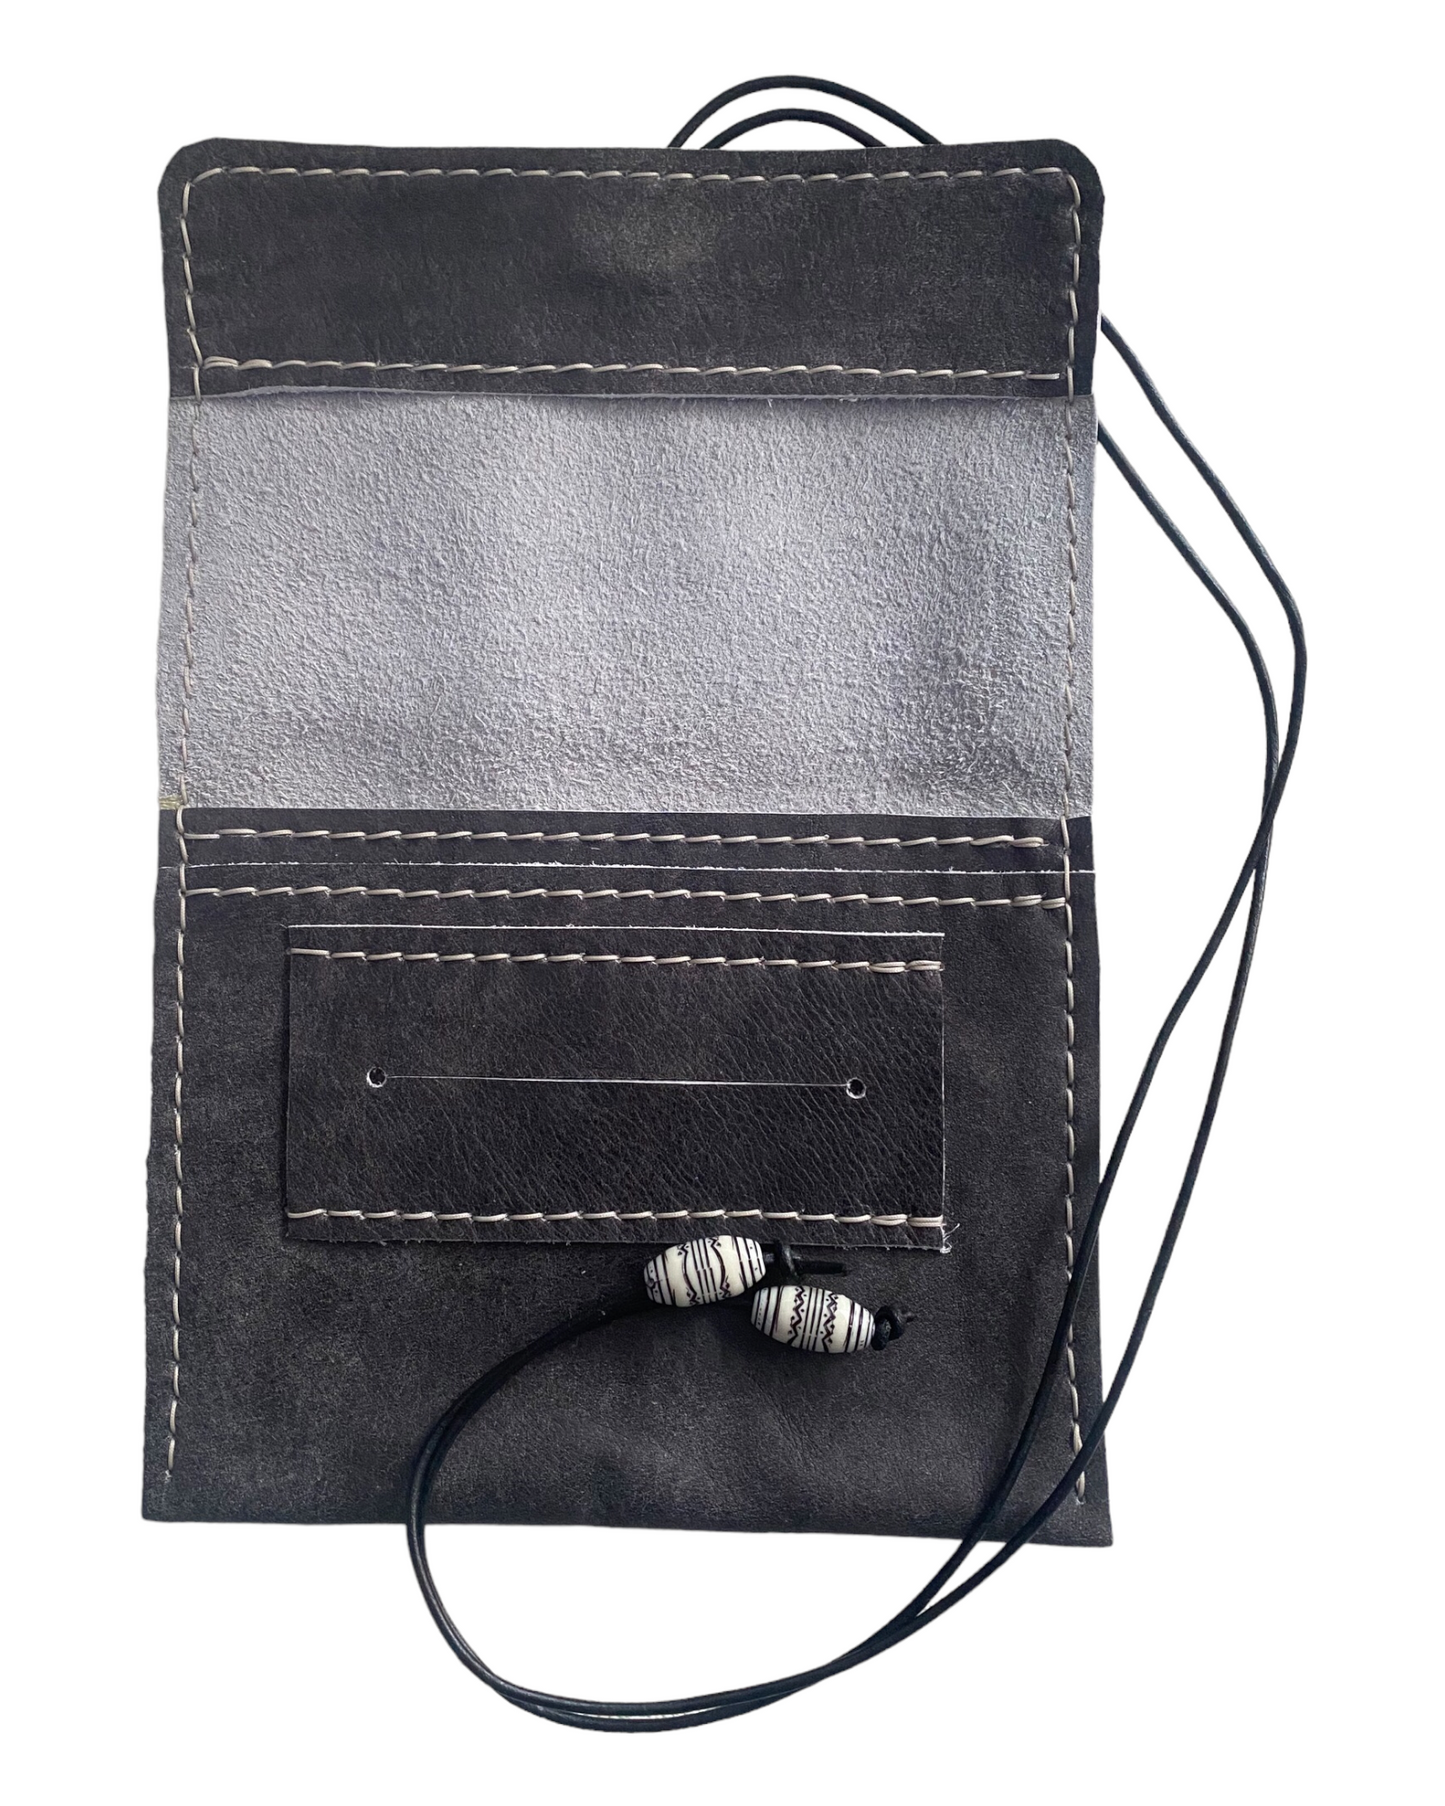 Handmade Leather Tobacco Pouch 50g